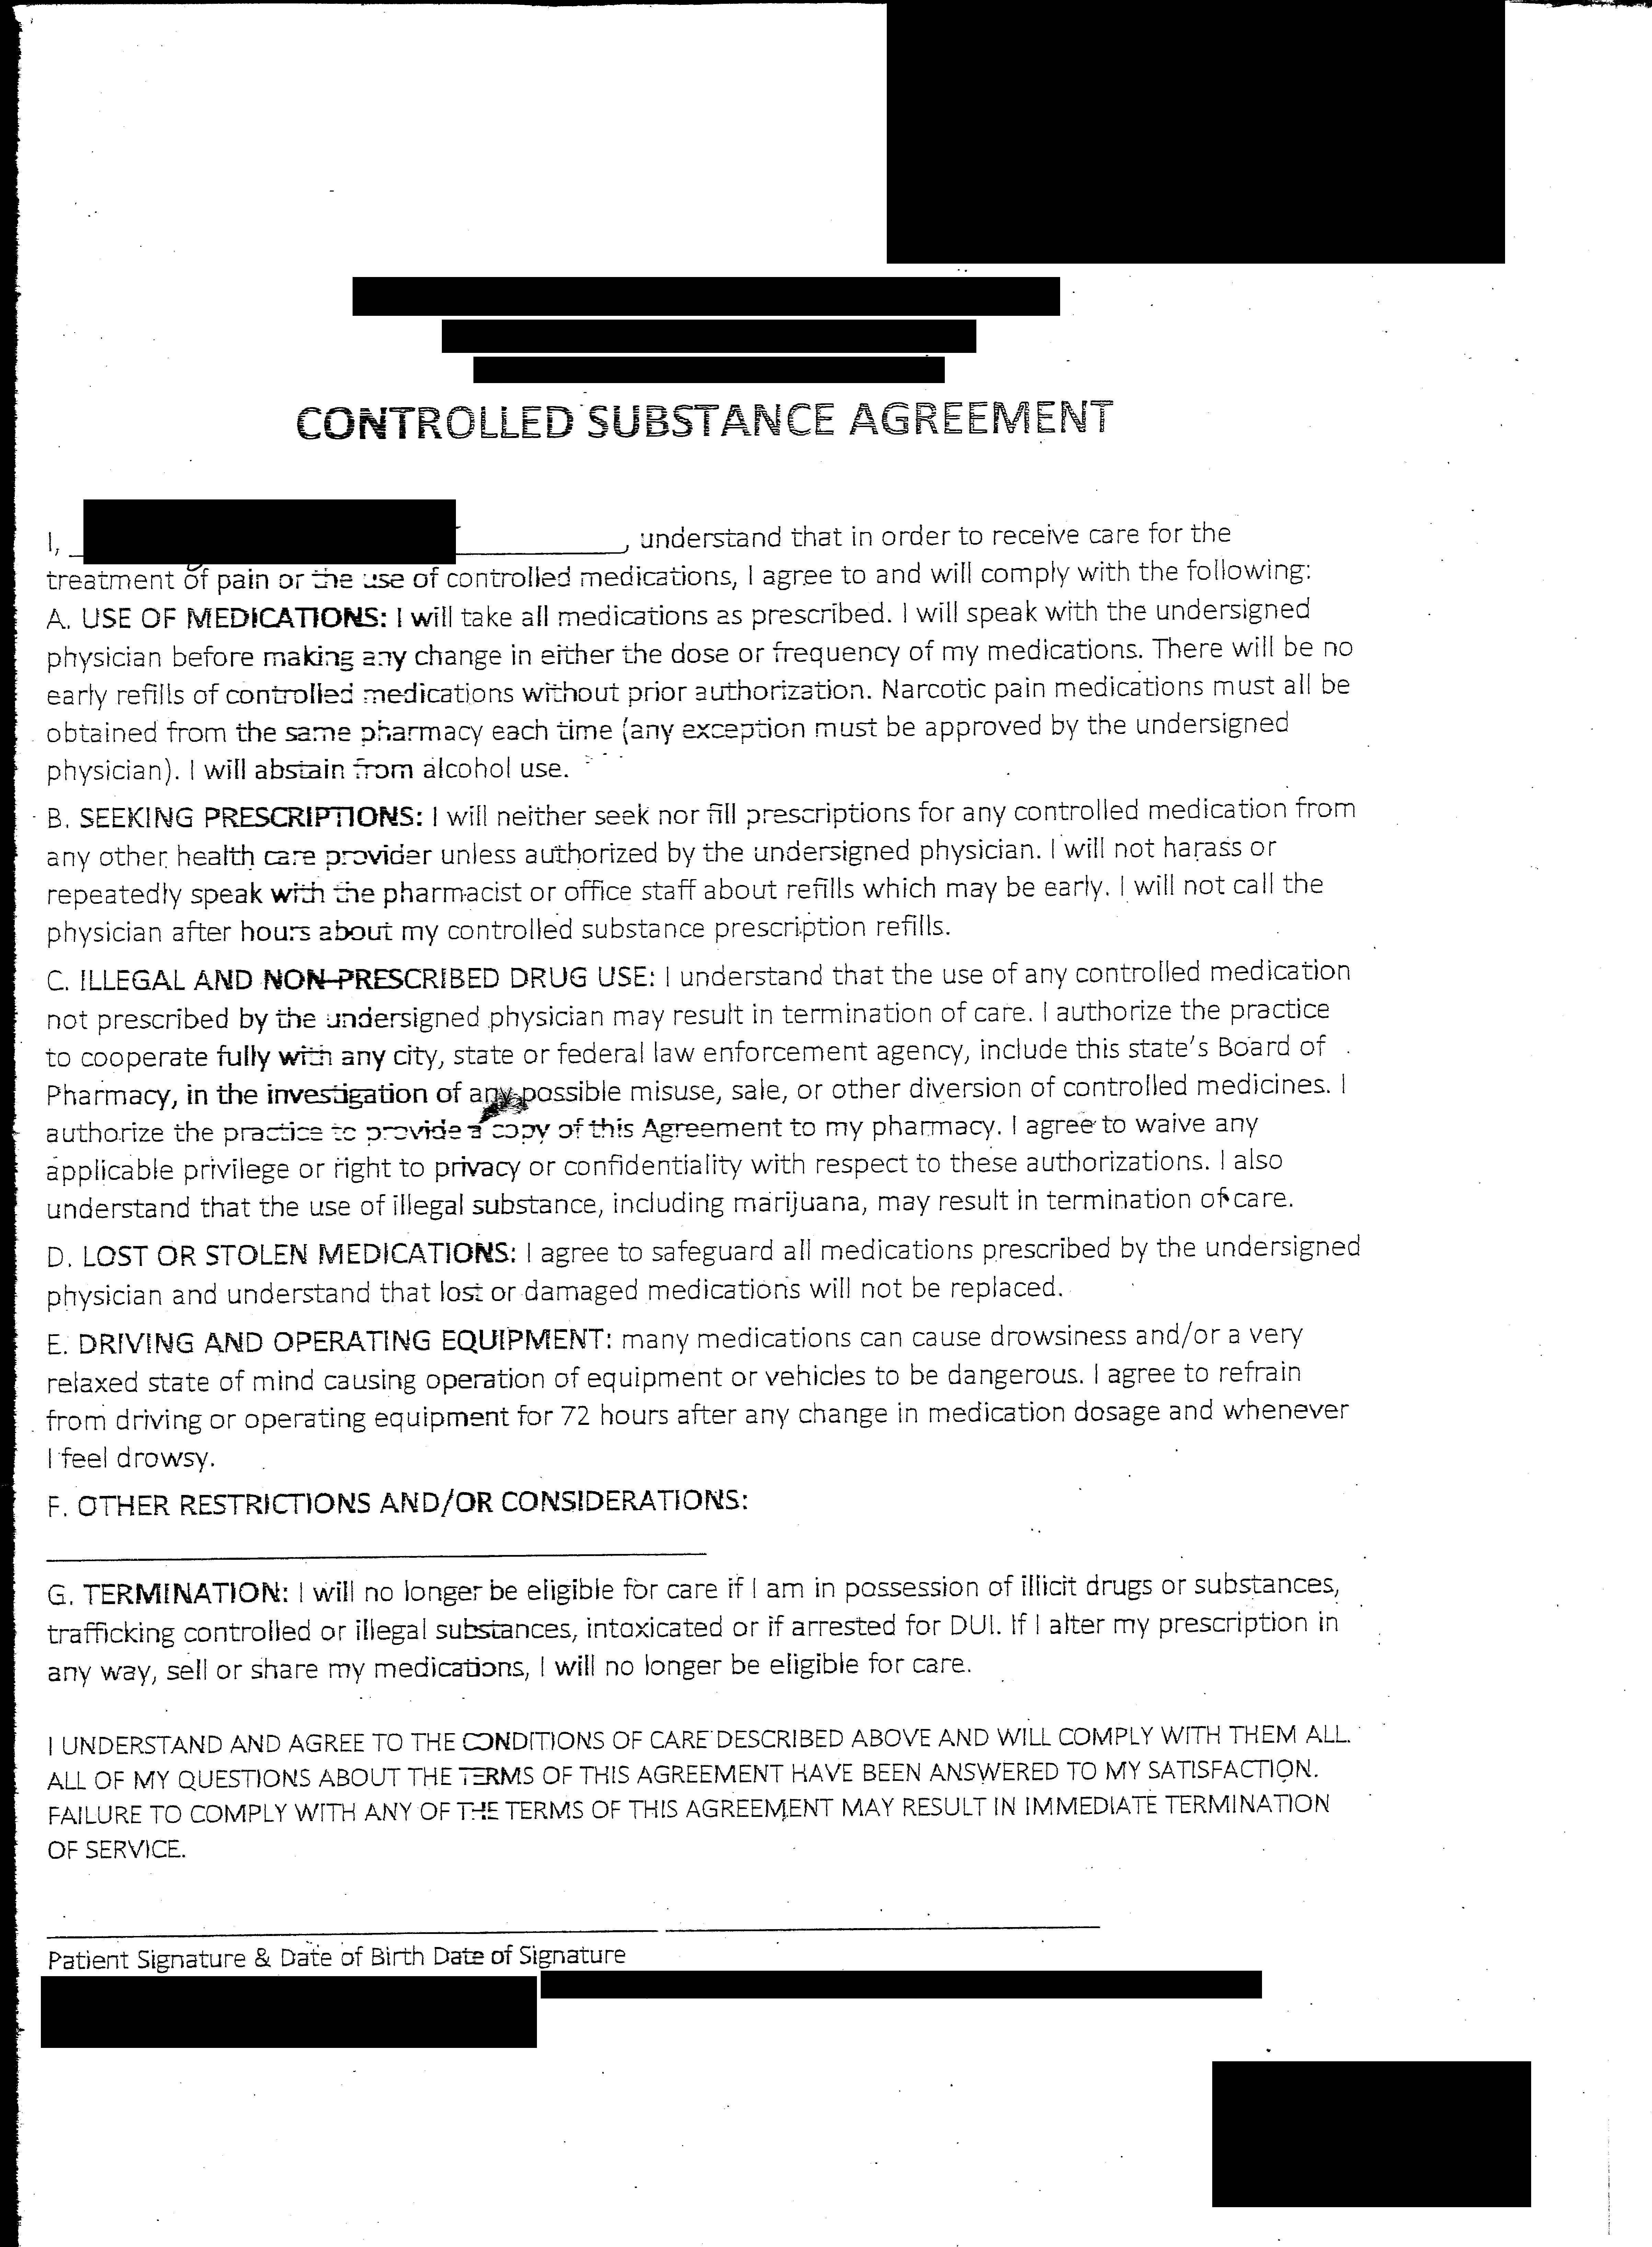 A scan of a controlled substance contract with personal information redacted.